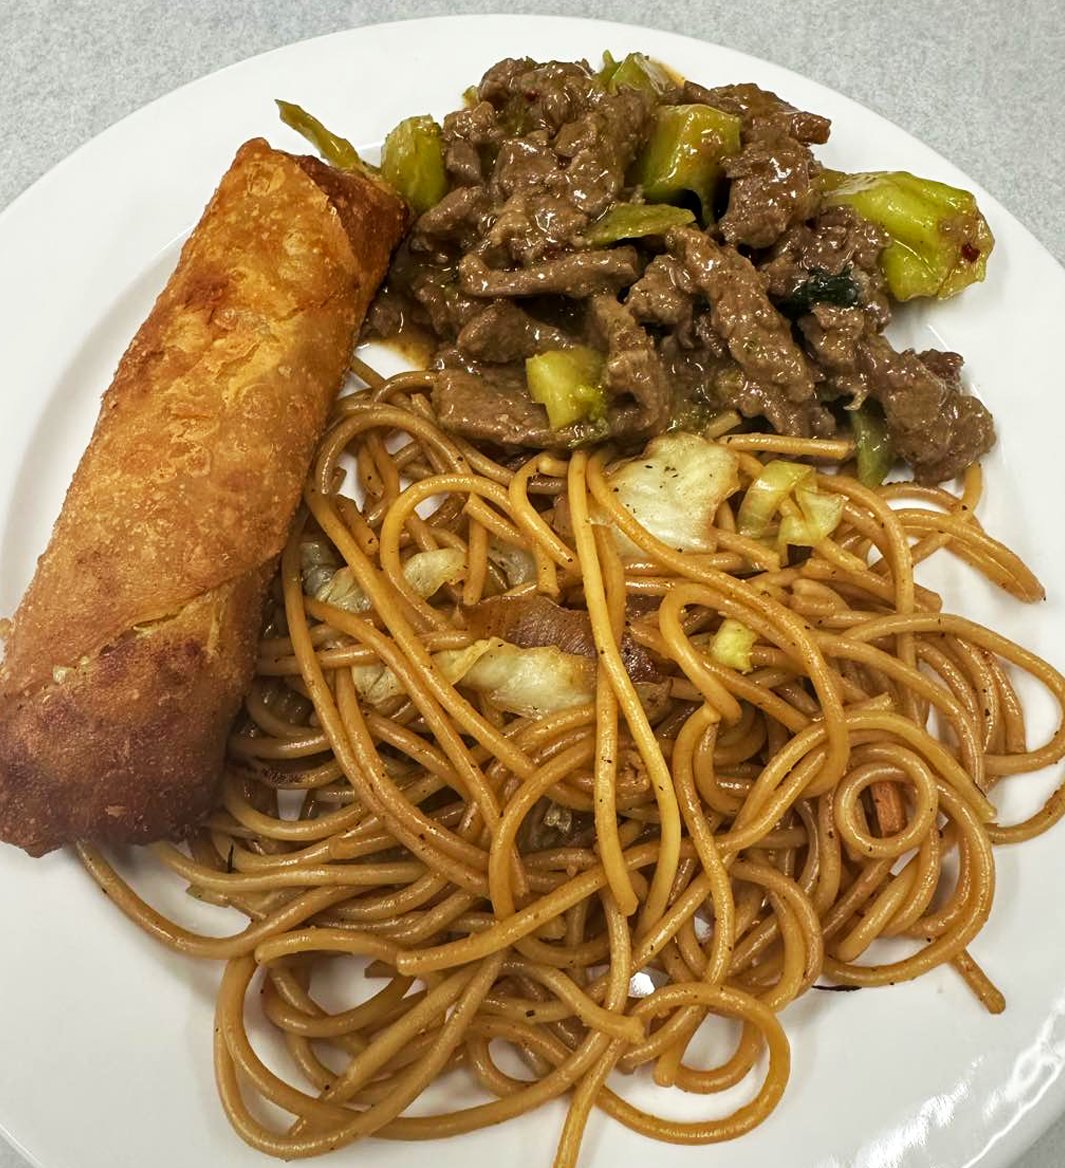 Our team knows what residents like at Compass Hawfields. We prepared a fan favorite: delicious beef and broccoli! 🥦🥩 It's all about bringing comfort and joy through great meals. 

#FromtheFieldFriday #foodservice #foodmanagement #culinaryservices #culinaryservicesgroup